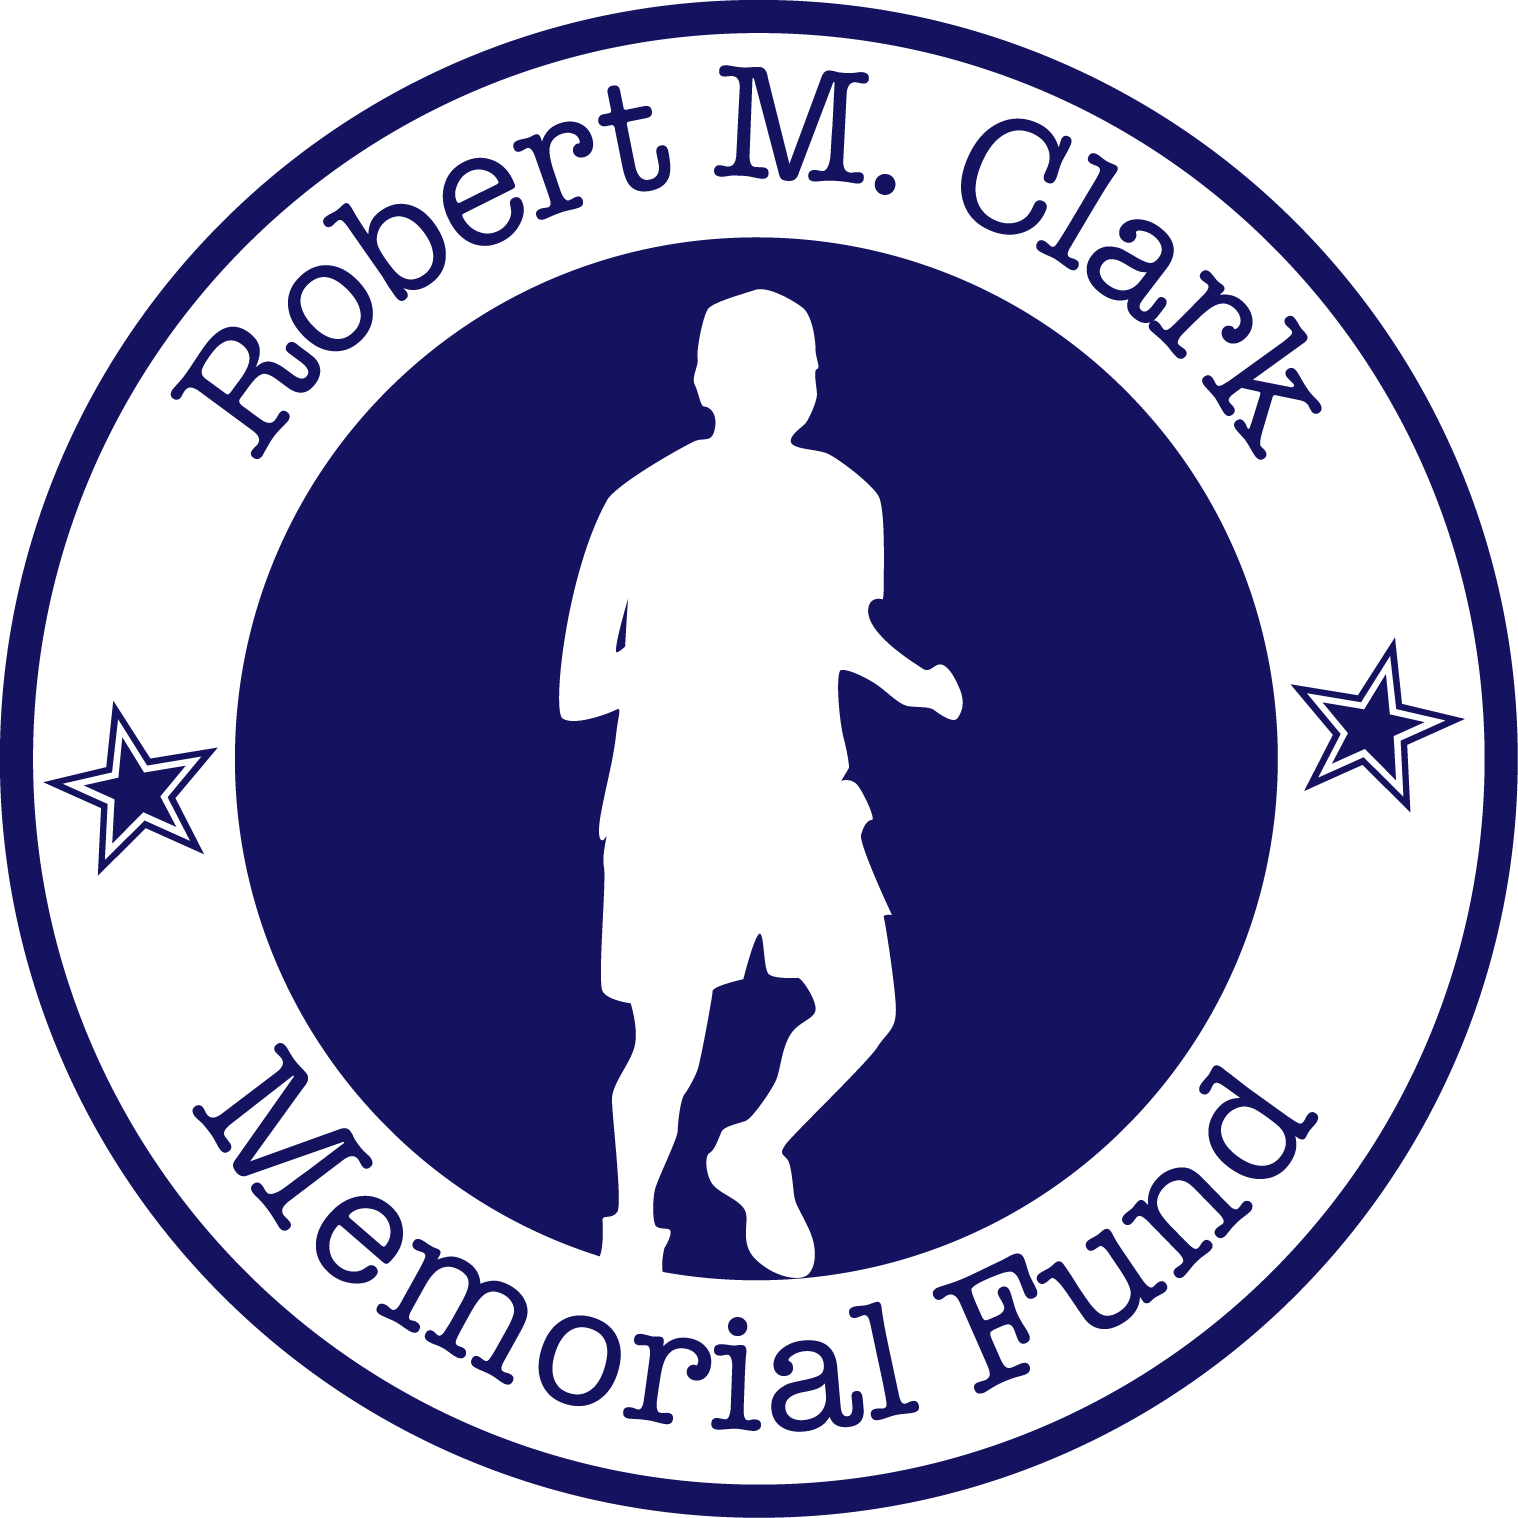 This race contributes to the Robert Clark Memorial Fund!